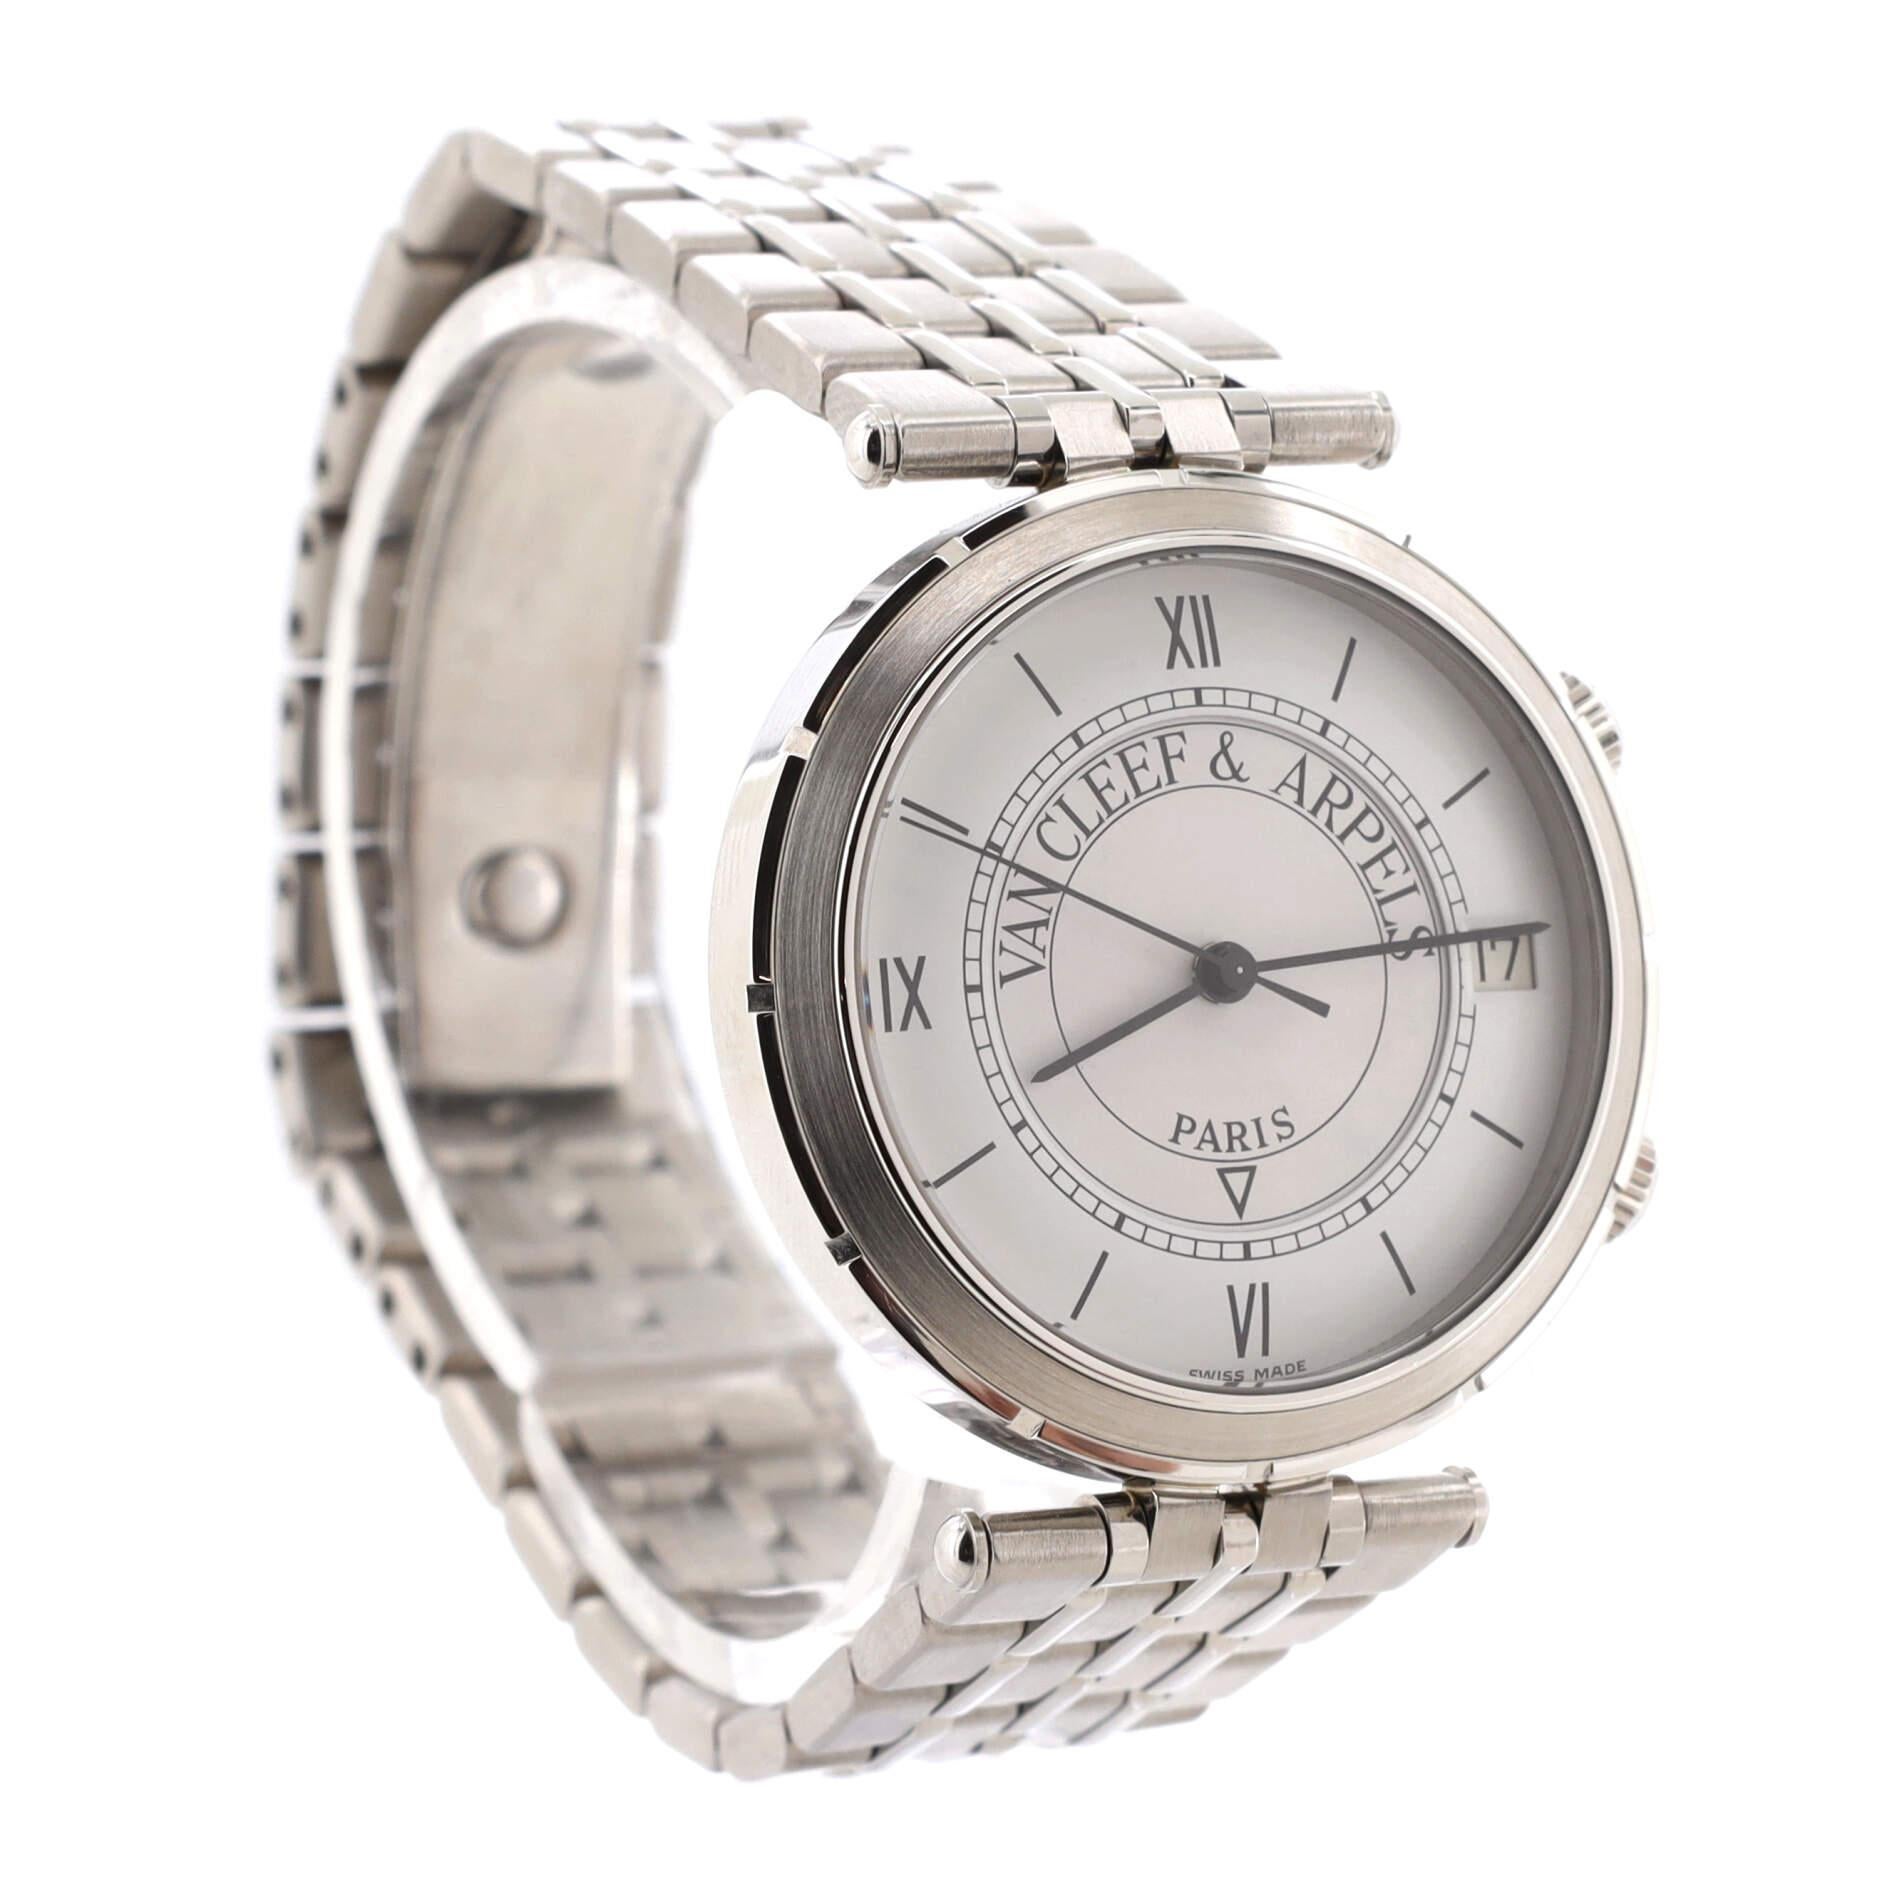 Condition: Very good. Moderate scratches and wear throughout. Wear and scratches on case and bracelet.
Accessories: No Accessories
Measurements: Case Size/Width: 36mm, Watch Height: 10mm, Band Width: 19mm, Wrist circumference: 6.0